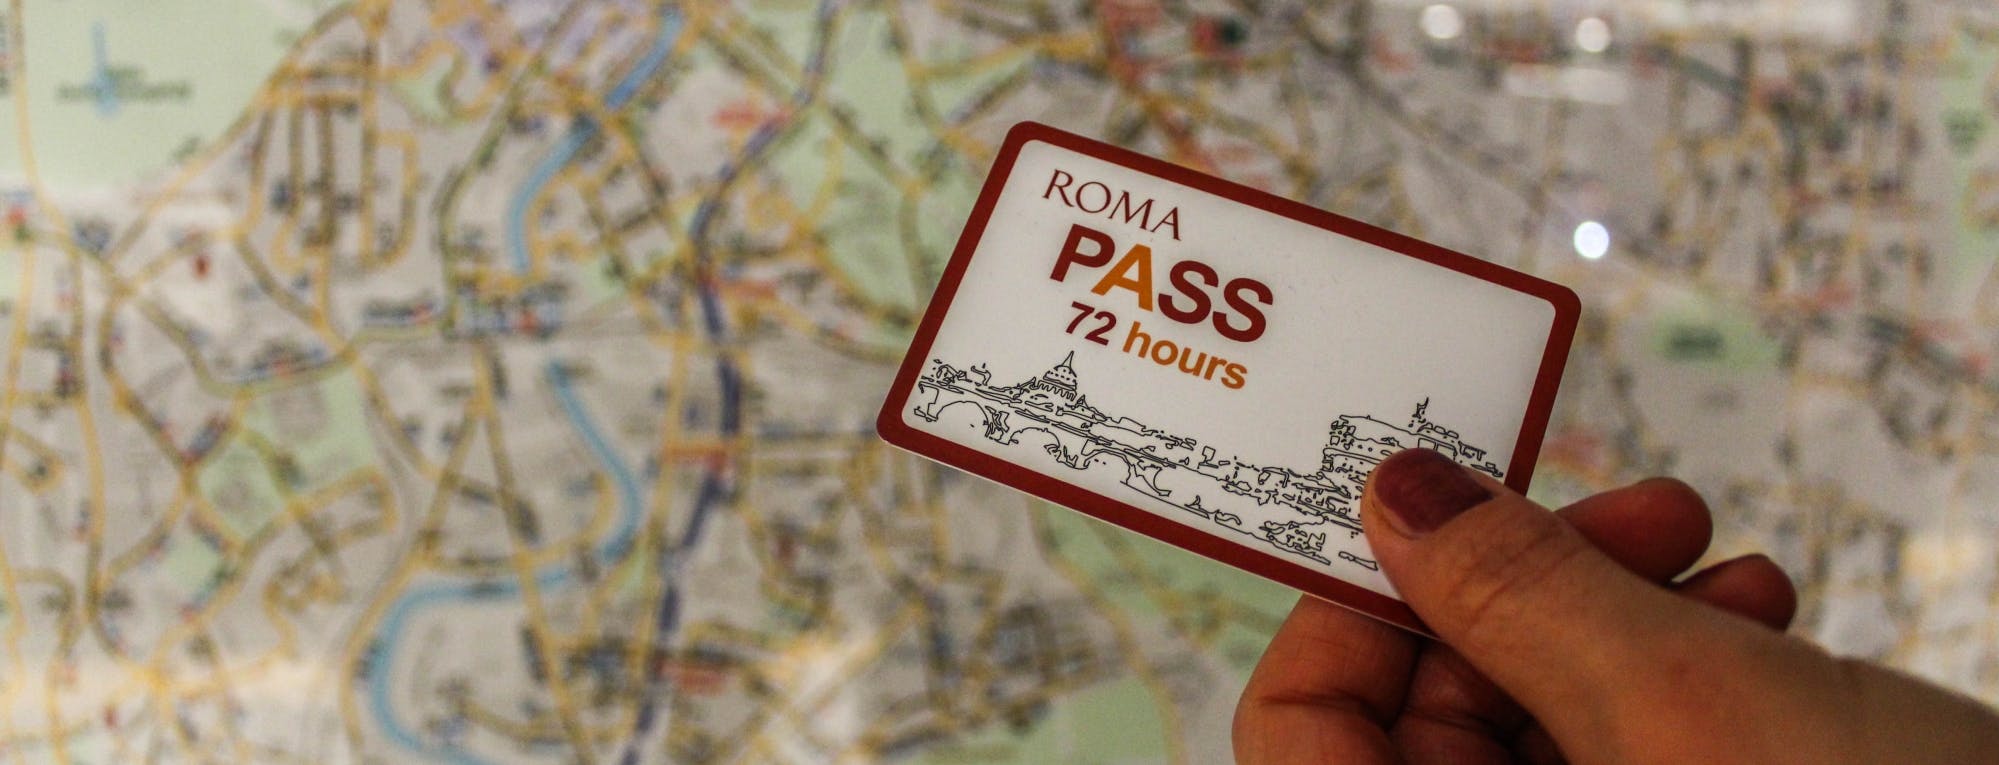 72-timers Roma-pass